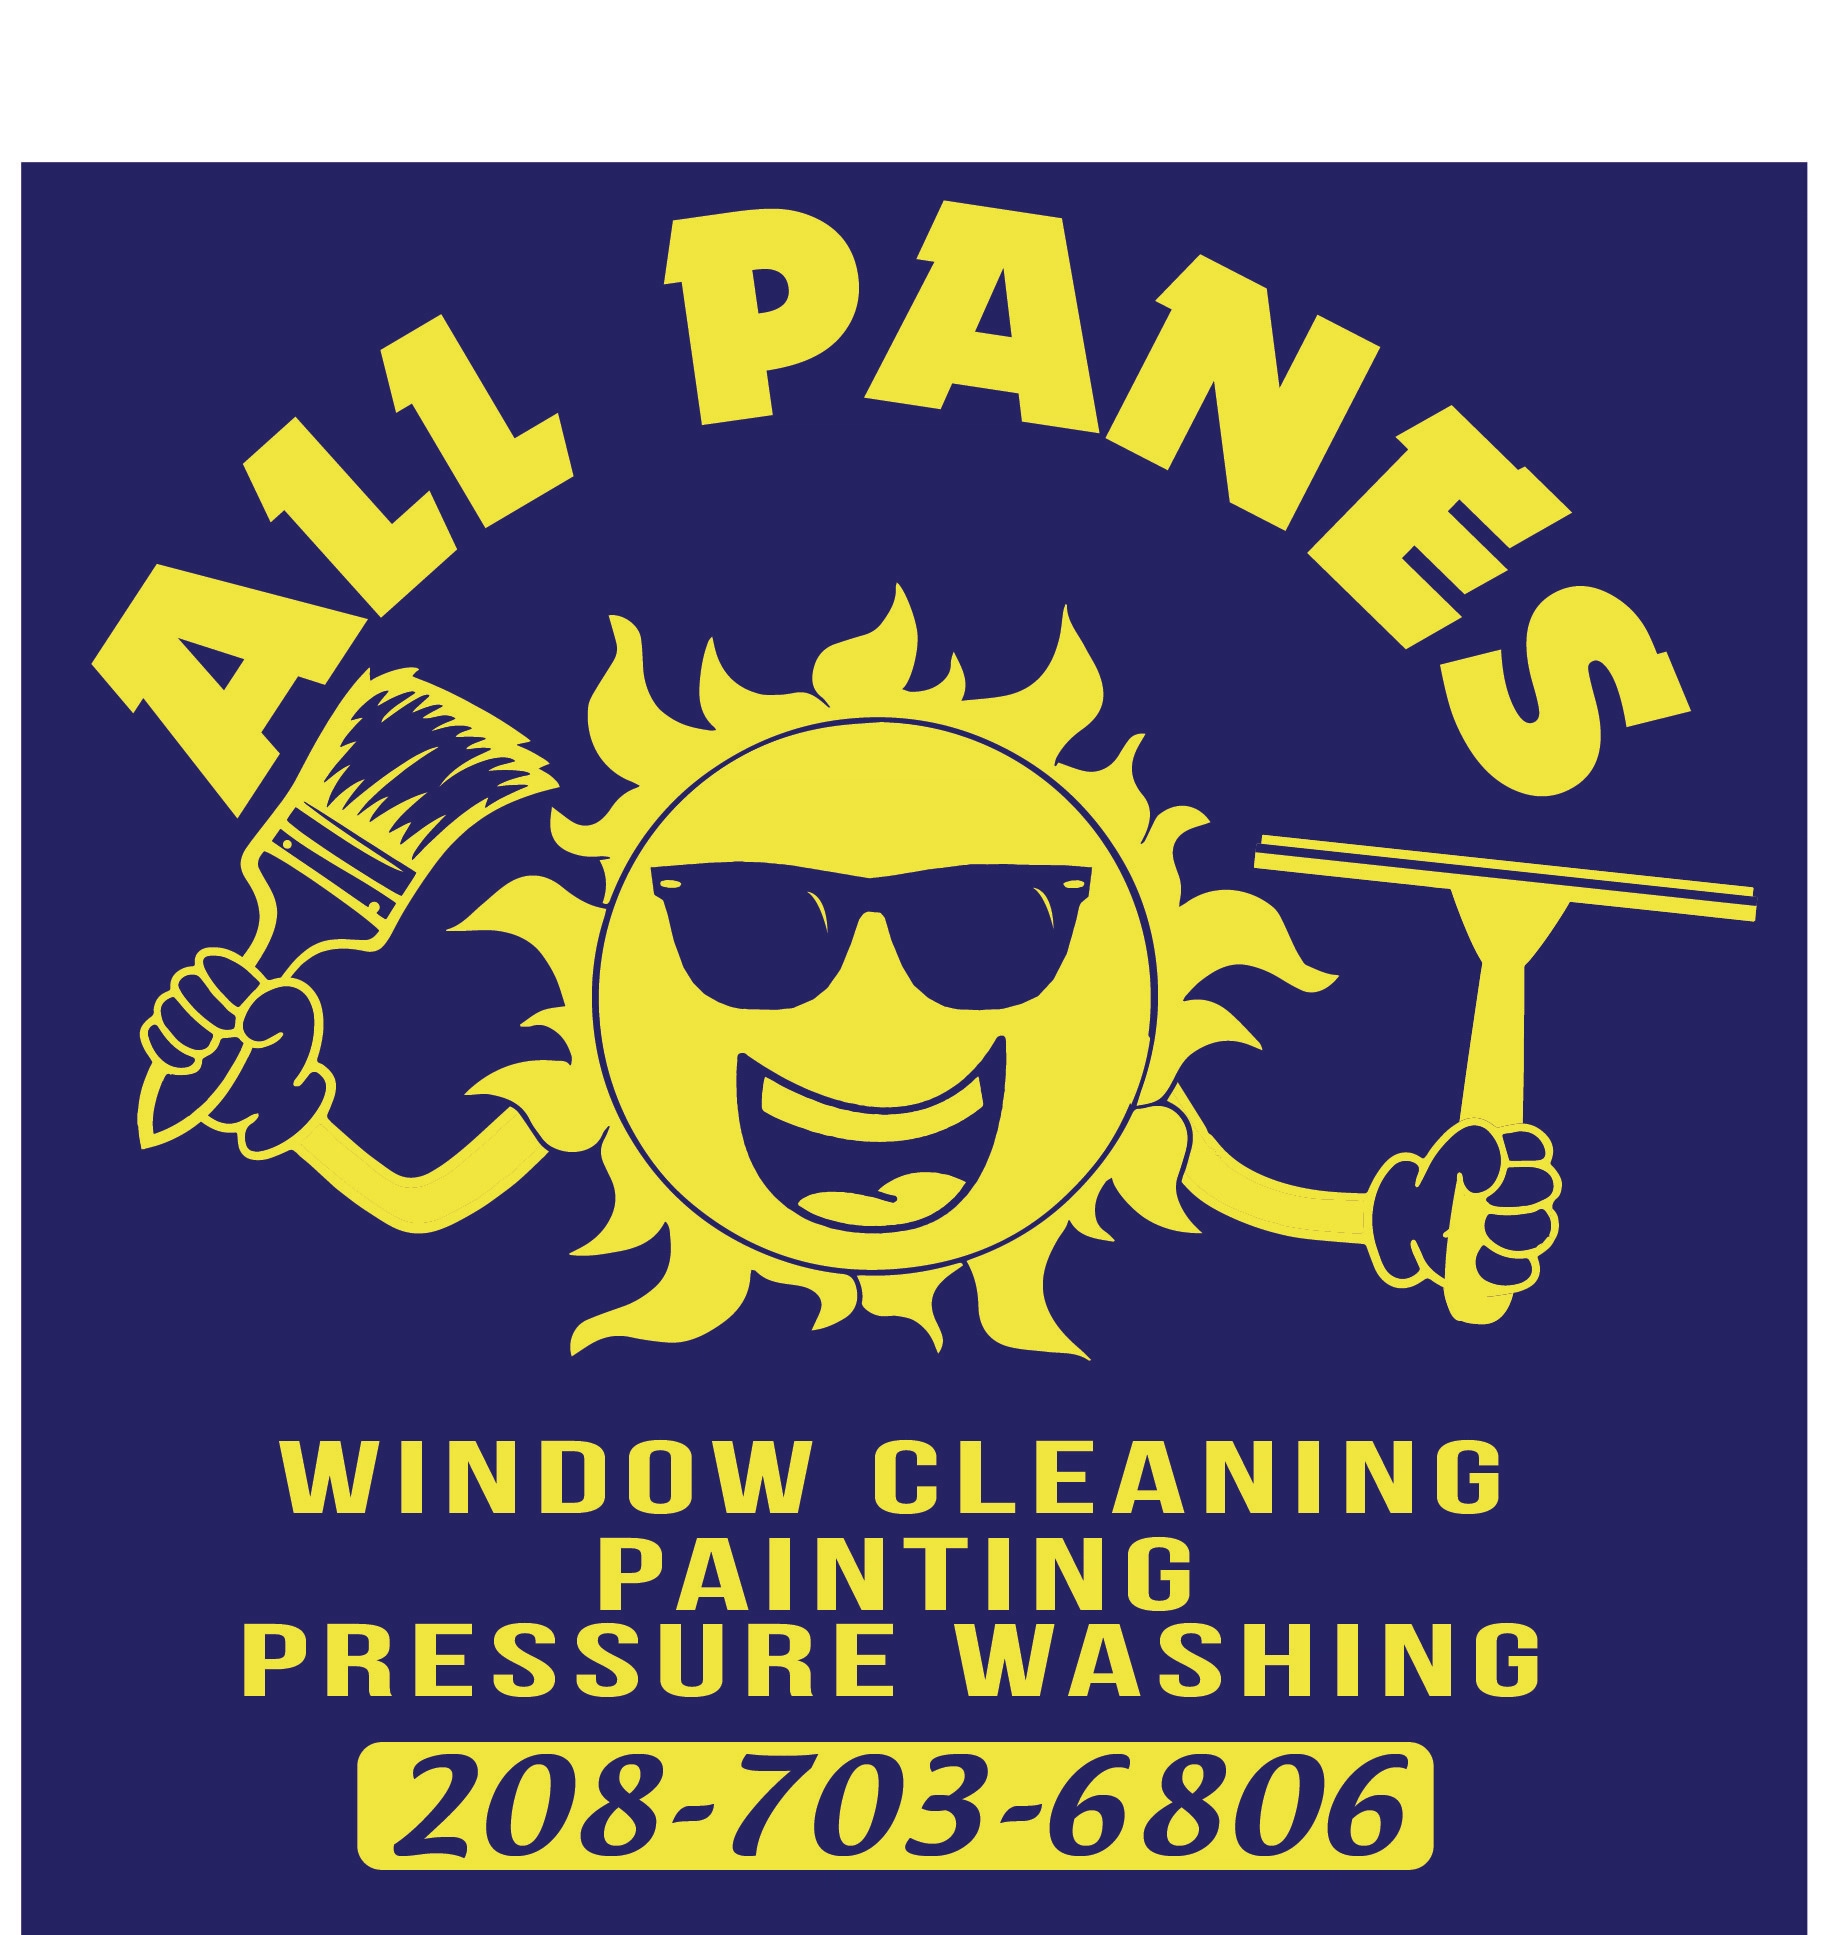 All Panes Window Cleaning, Painting, & Pressure Washing LLC. Logo